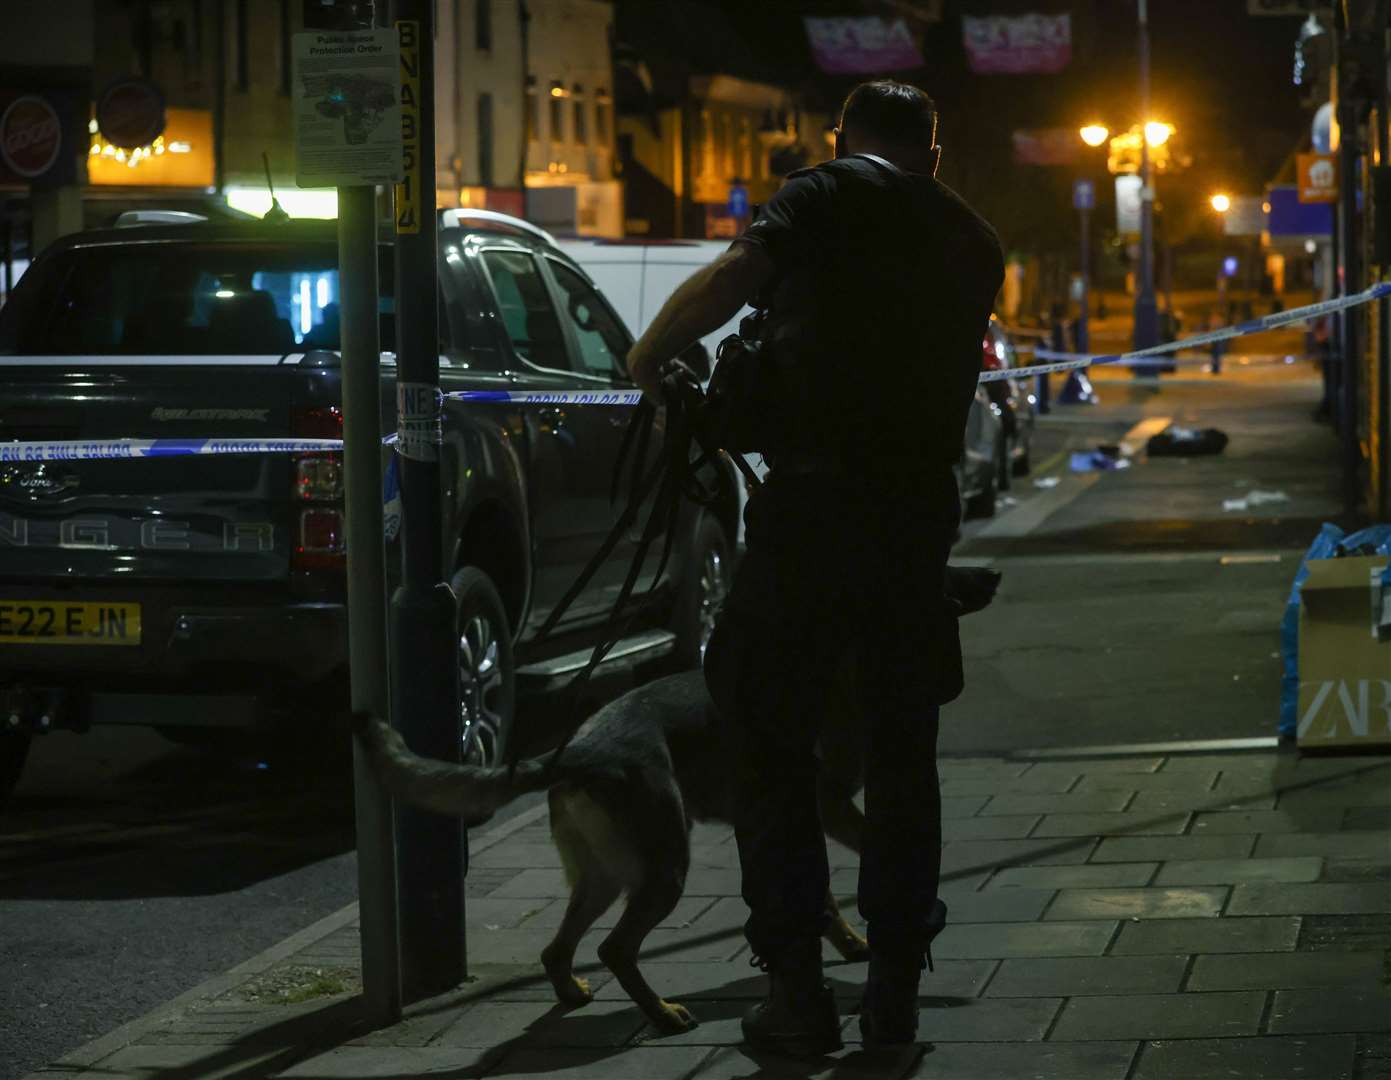 Sniffer dog teams were also spotted at the scene in New Road, Gravesend. Photo: UKNIP